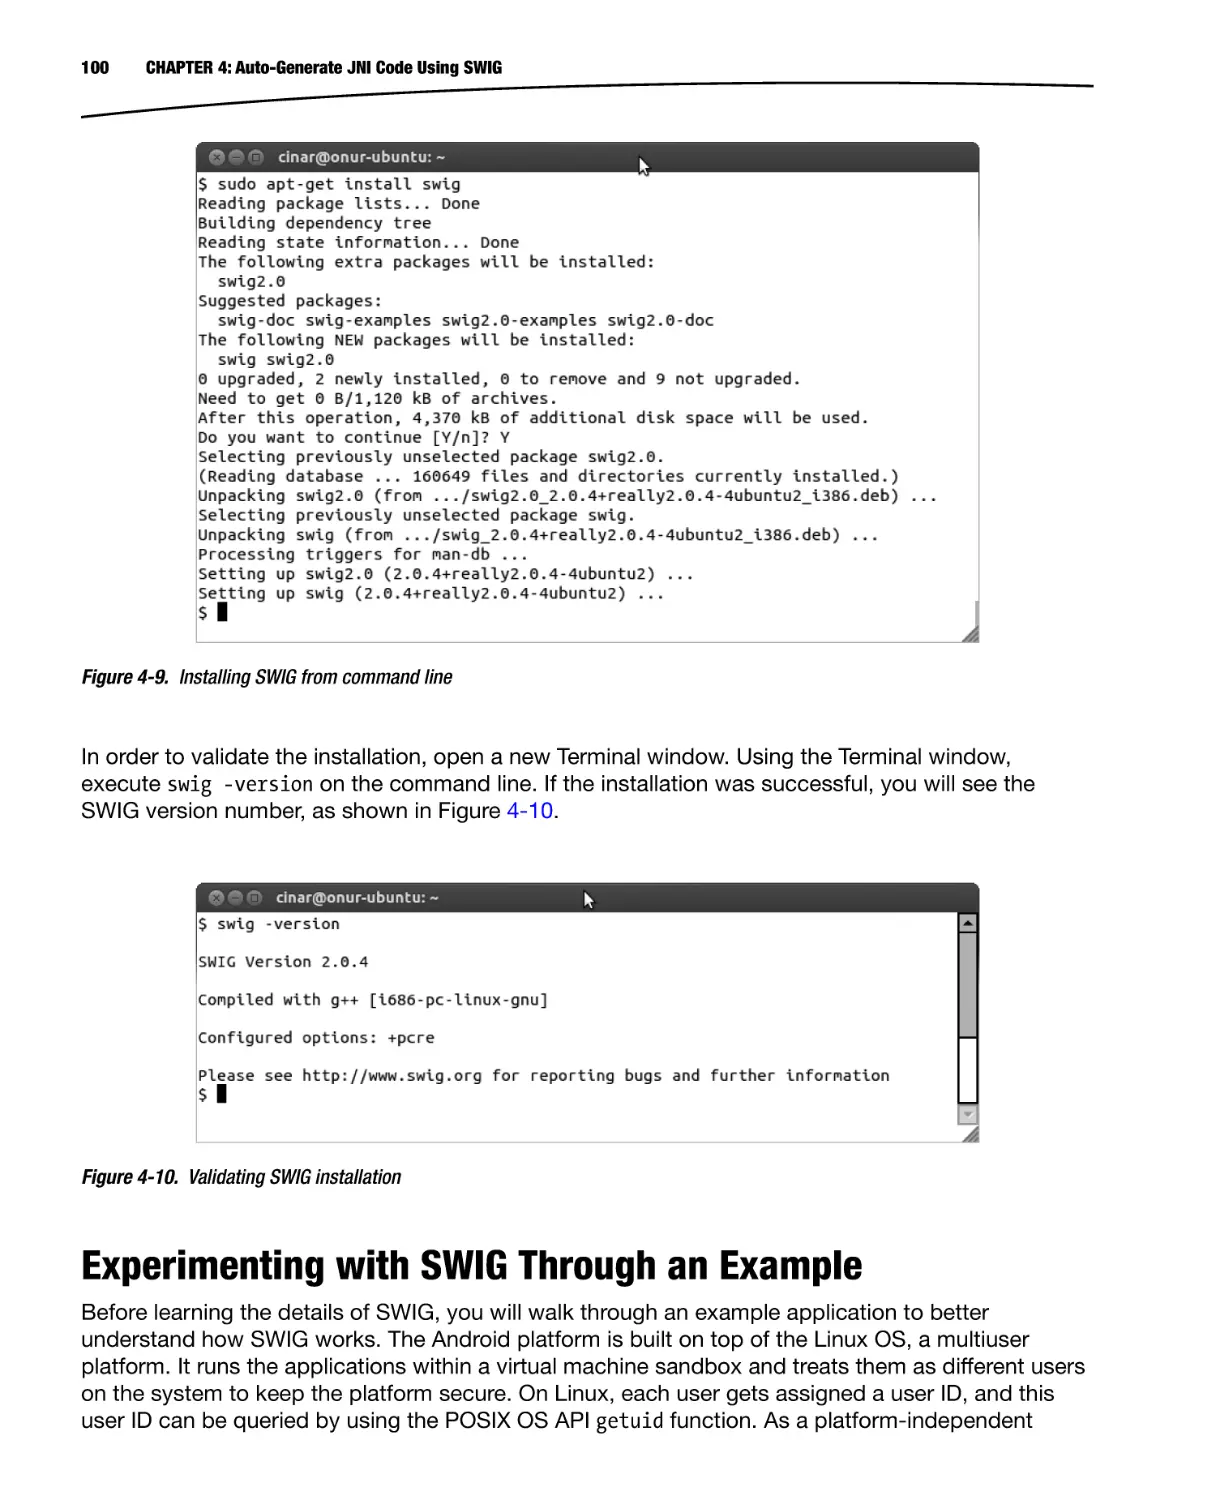 Experimenting with SWIG Through an Example